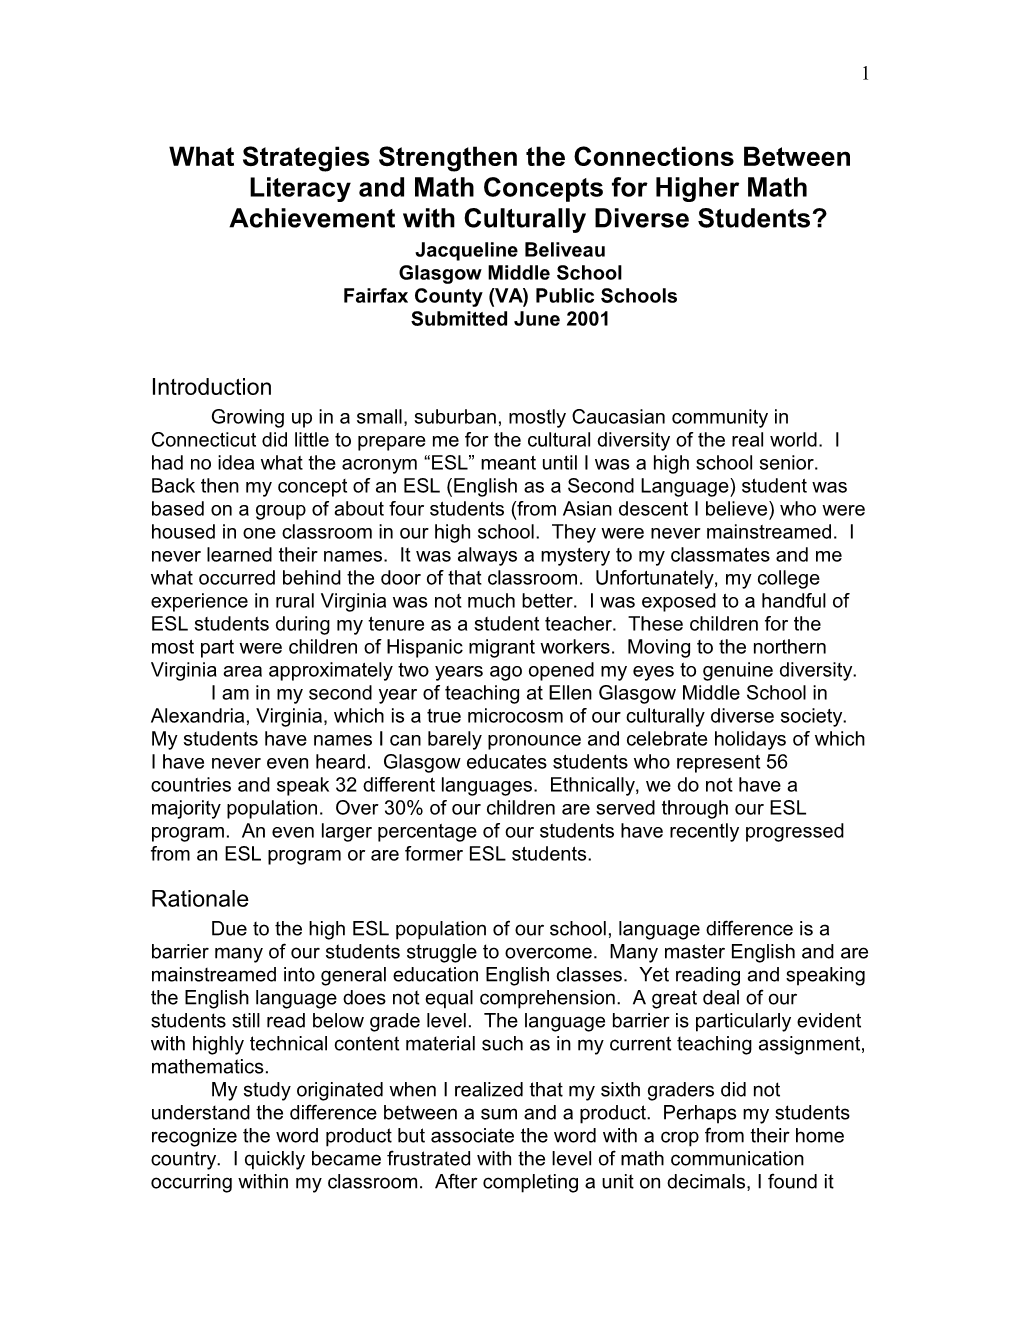 What Strategies Strengthen the Connections Between Literacy and Math Concepts for Higher